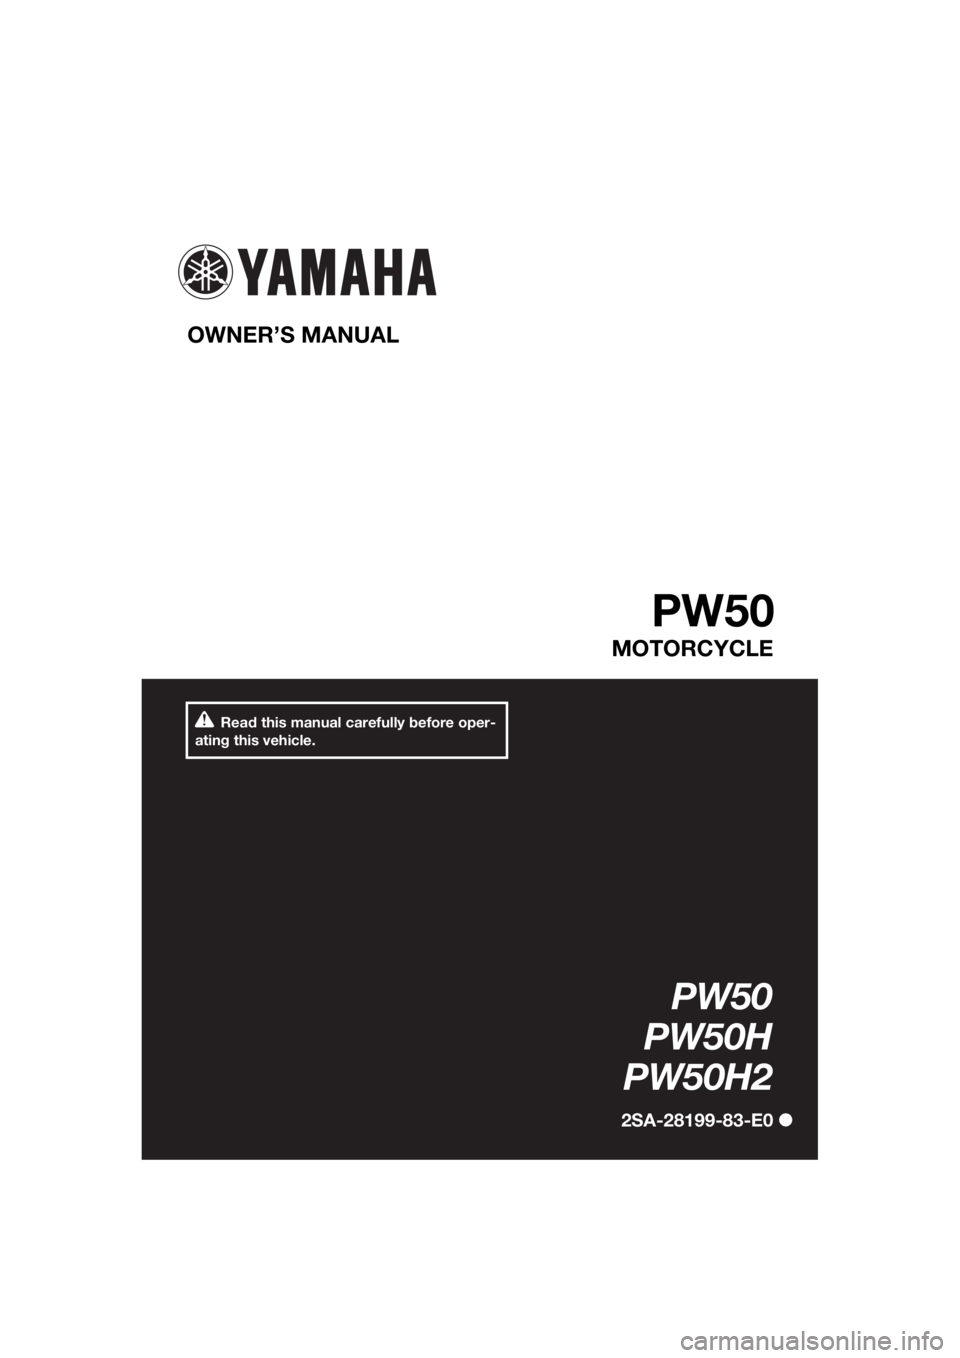 YAMAHA PW50 2017  Owners Manual Read this manual carefully before oper-
ating this vehicle.
OWNER’S MANUAL 
PW50
MOTORCYCLE
PW50
PW50H
PW50H2
2SA-28199-83-E0
U2SA83E0.book  Page 1  Thursday, September 22, 2016  3:52 PM 